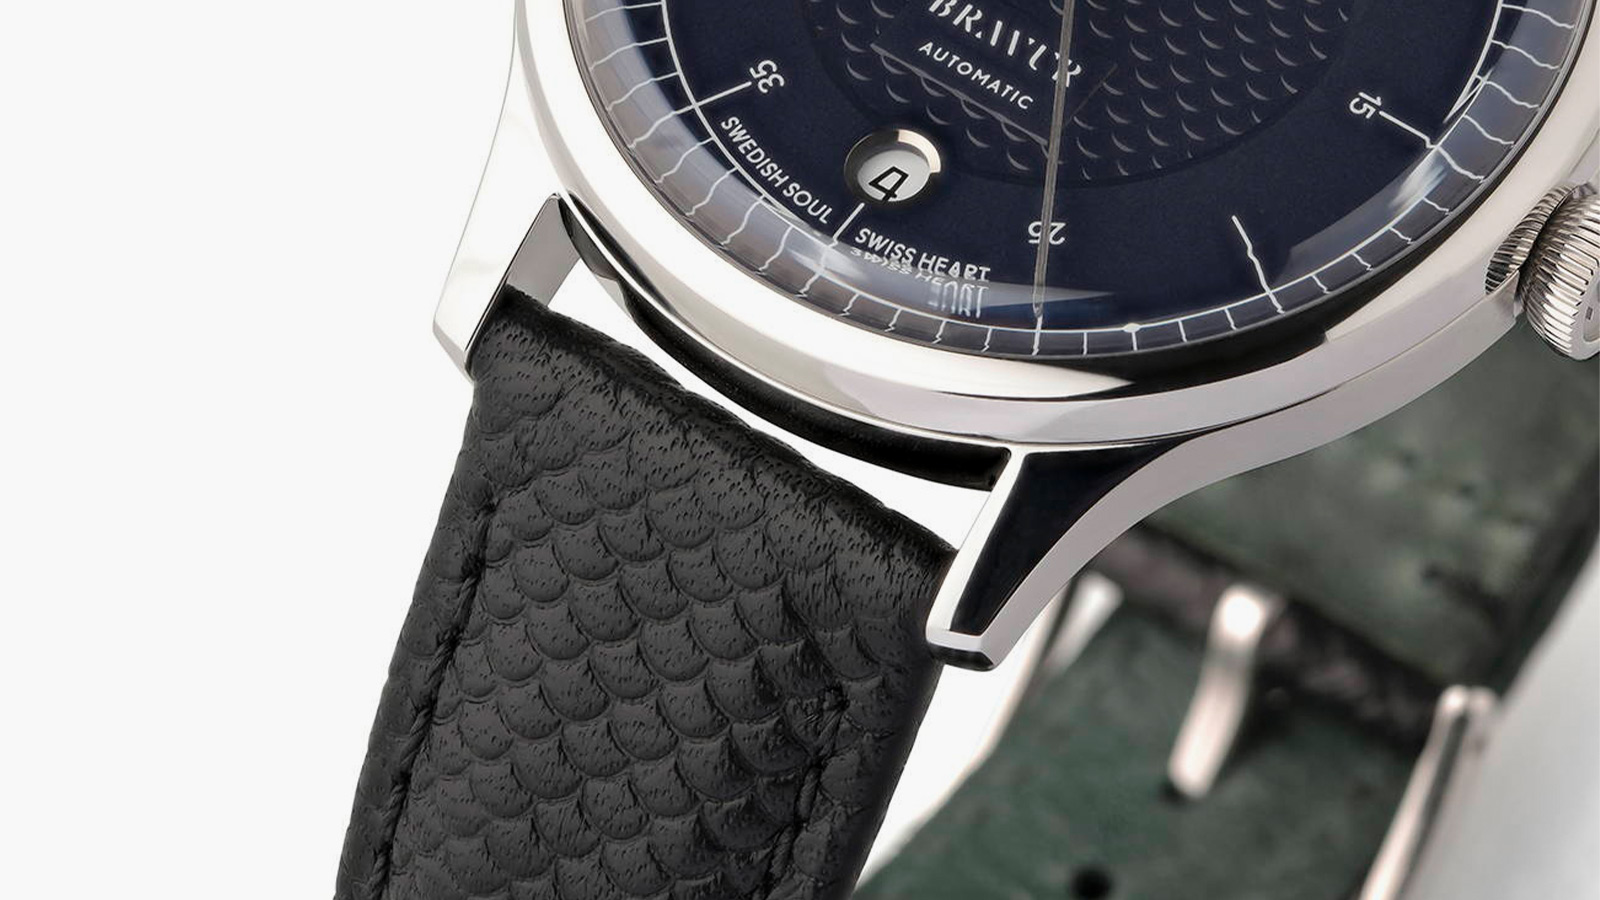 The Bravur x Wingårdhs Limited Edition Is A Dress Watch With An Elegant ...